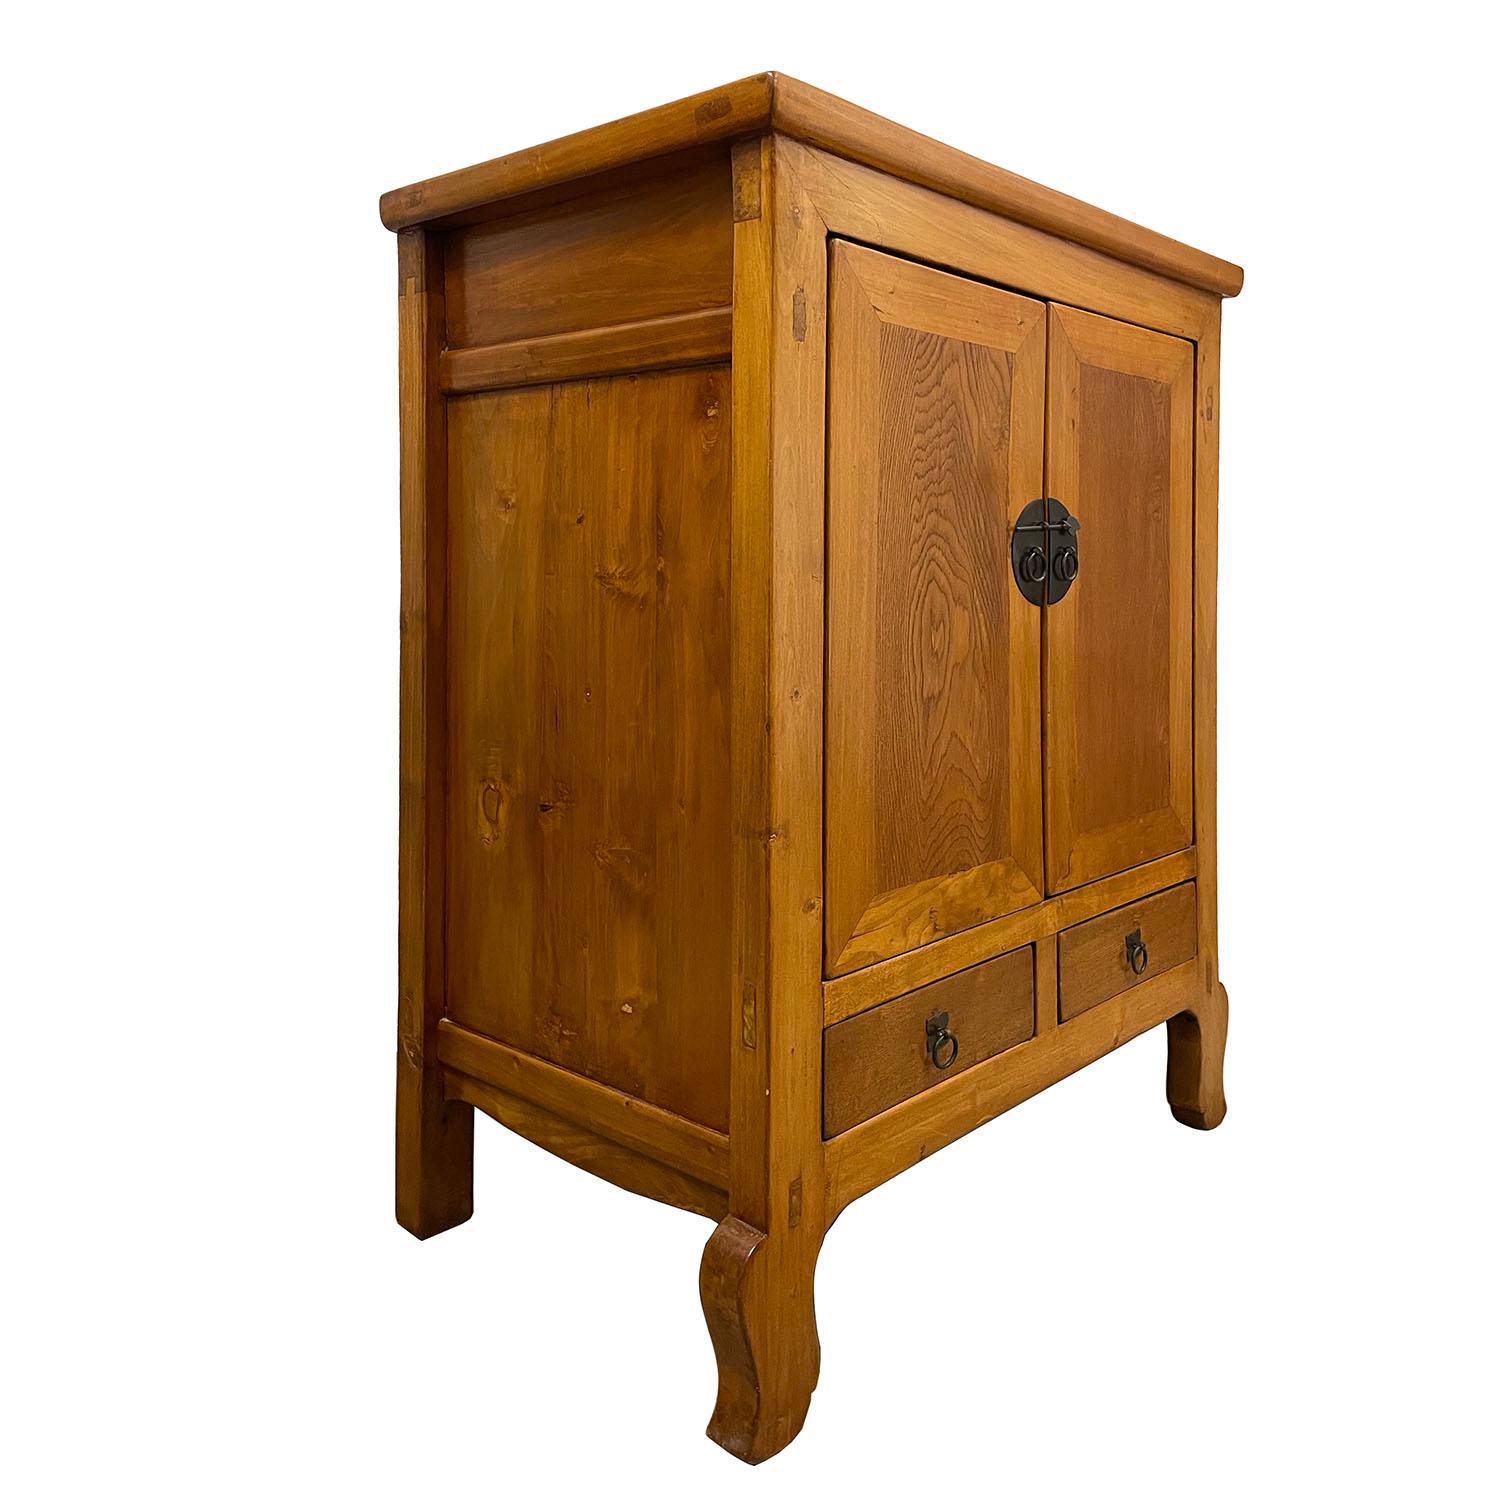 Size: 44in H x 33in W x 20in D
Drawer: 3in H x 11in W x 12.5in D each
Door opening: 25in H x 23in W
Origin: China
Circa: 1950's
Material: Wood
Condition: Solid wood construction, Well balance, sturdy, normal age wear.

Description: This beautiful